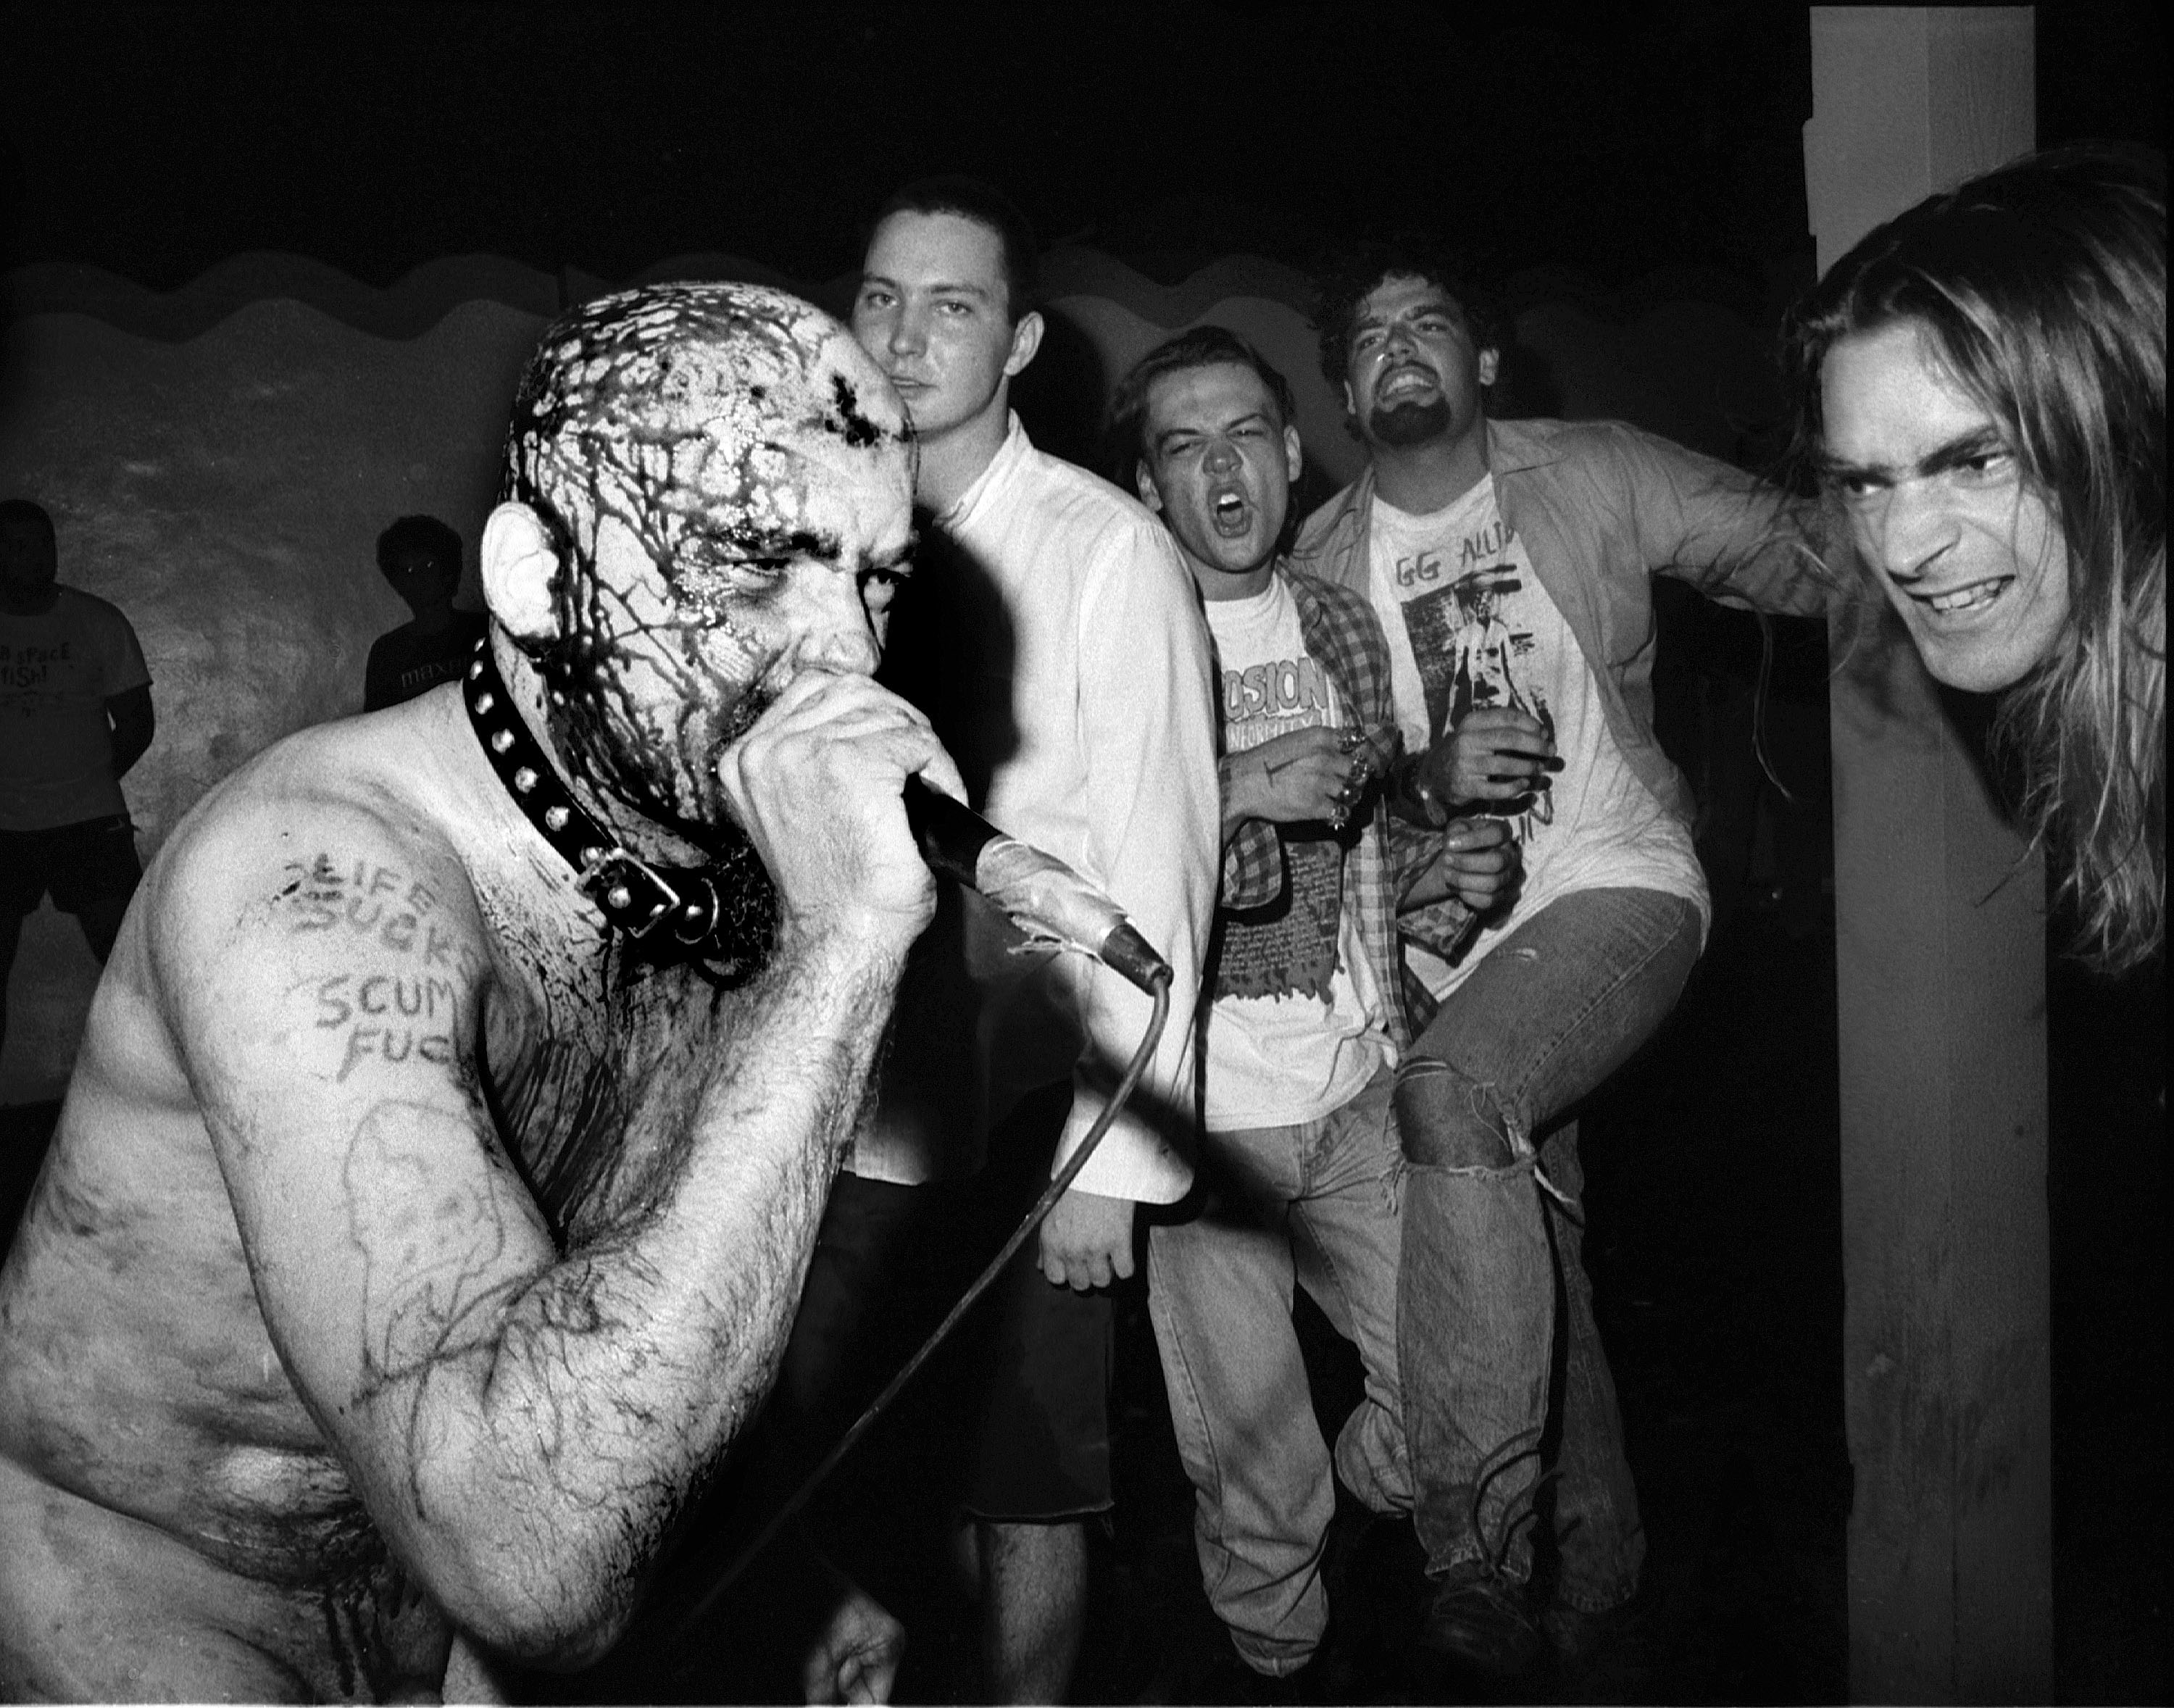 What Was GG Allin All About.